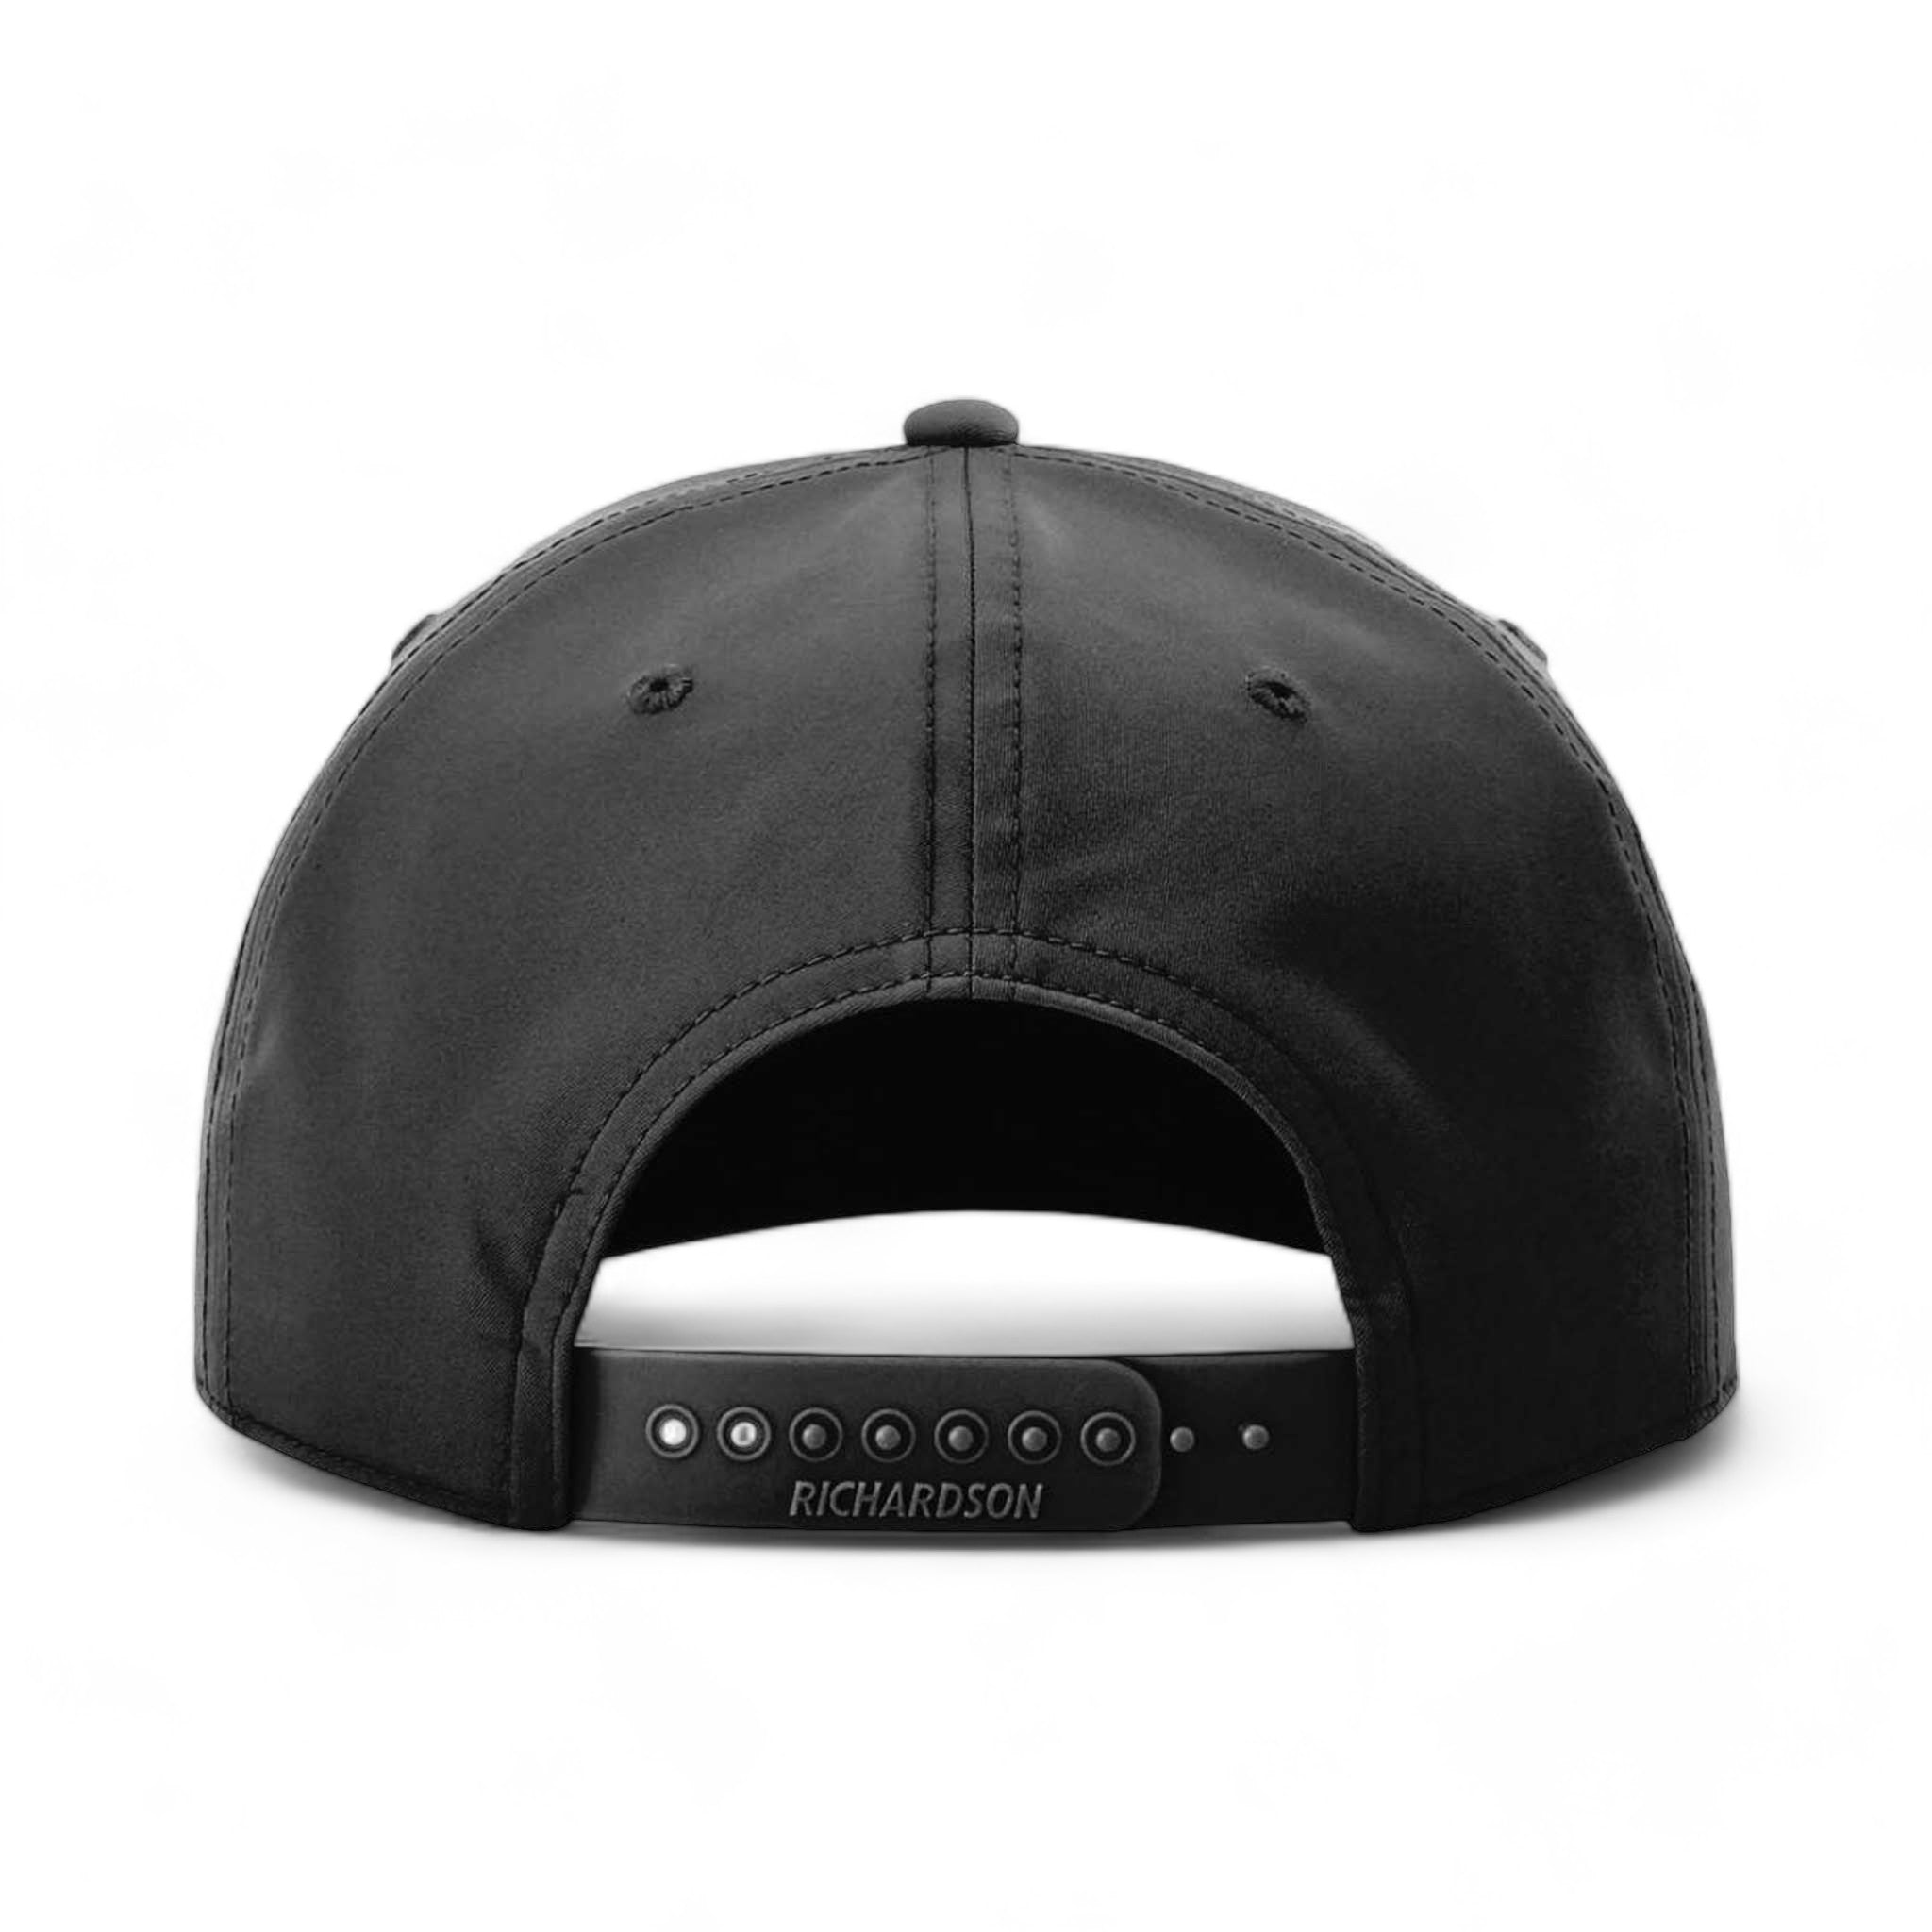 Back view of Richardson 258 custom hat in black and white